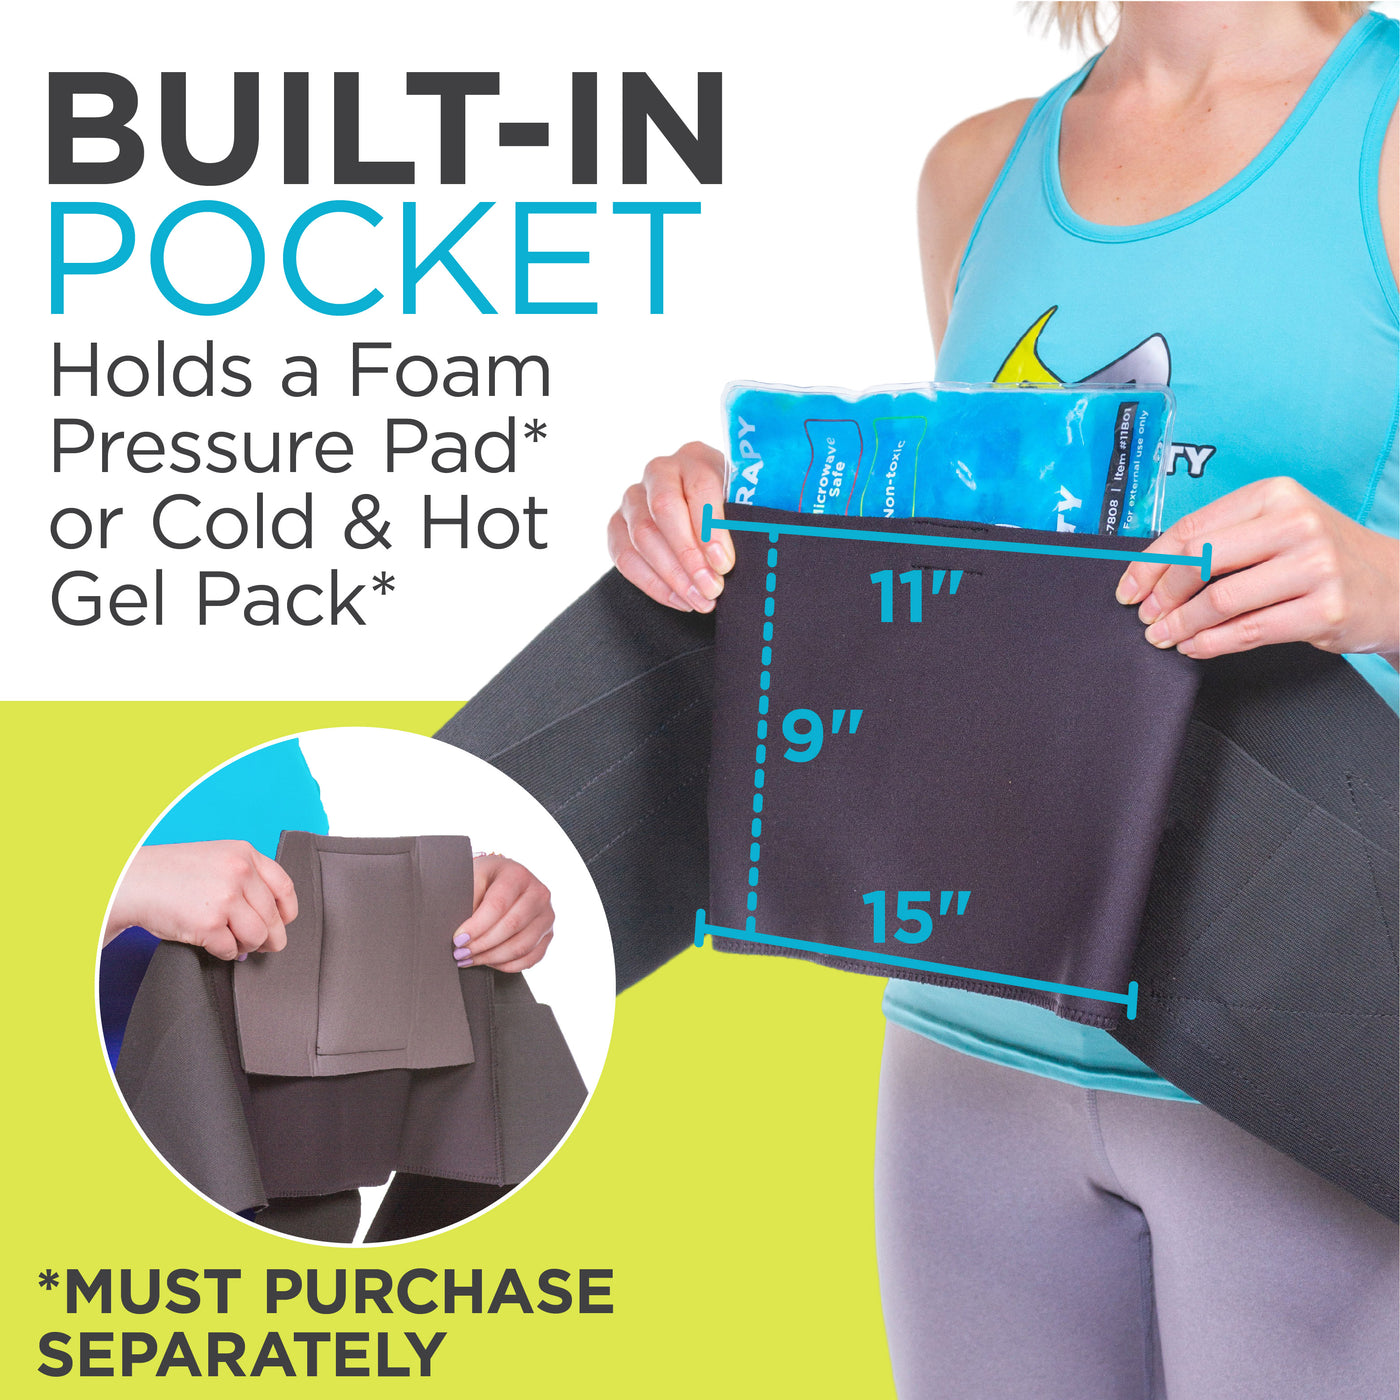 Built-in pocket can hold a foam pressure pad or cold and hot gel pack in the sleeping back brace